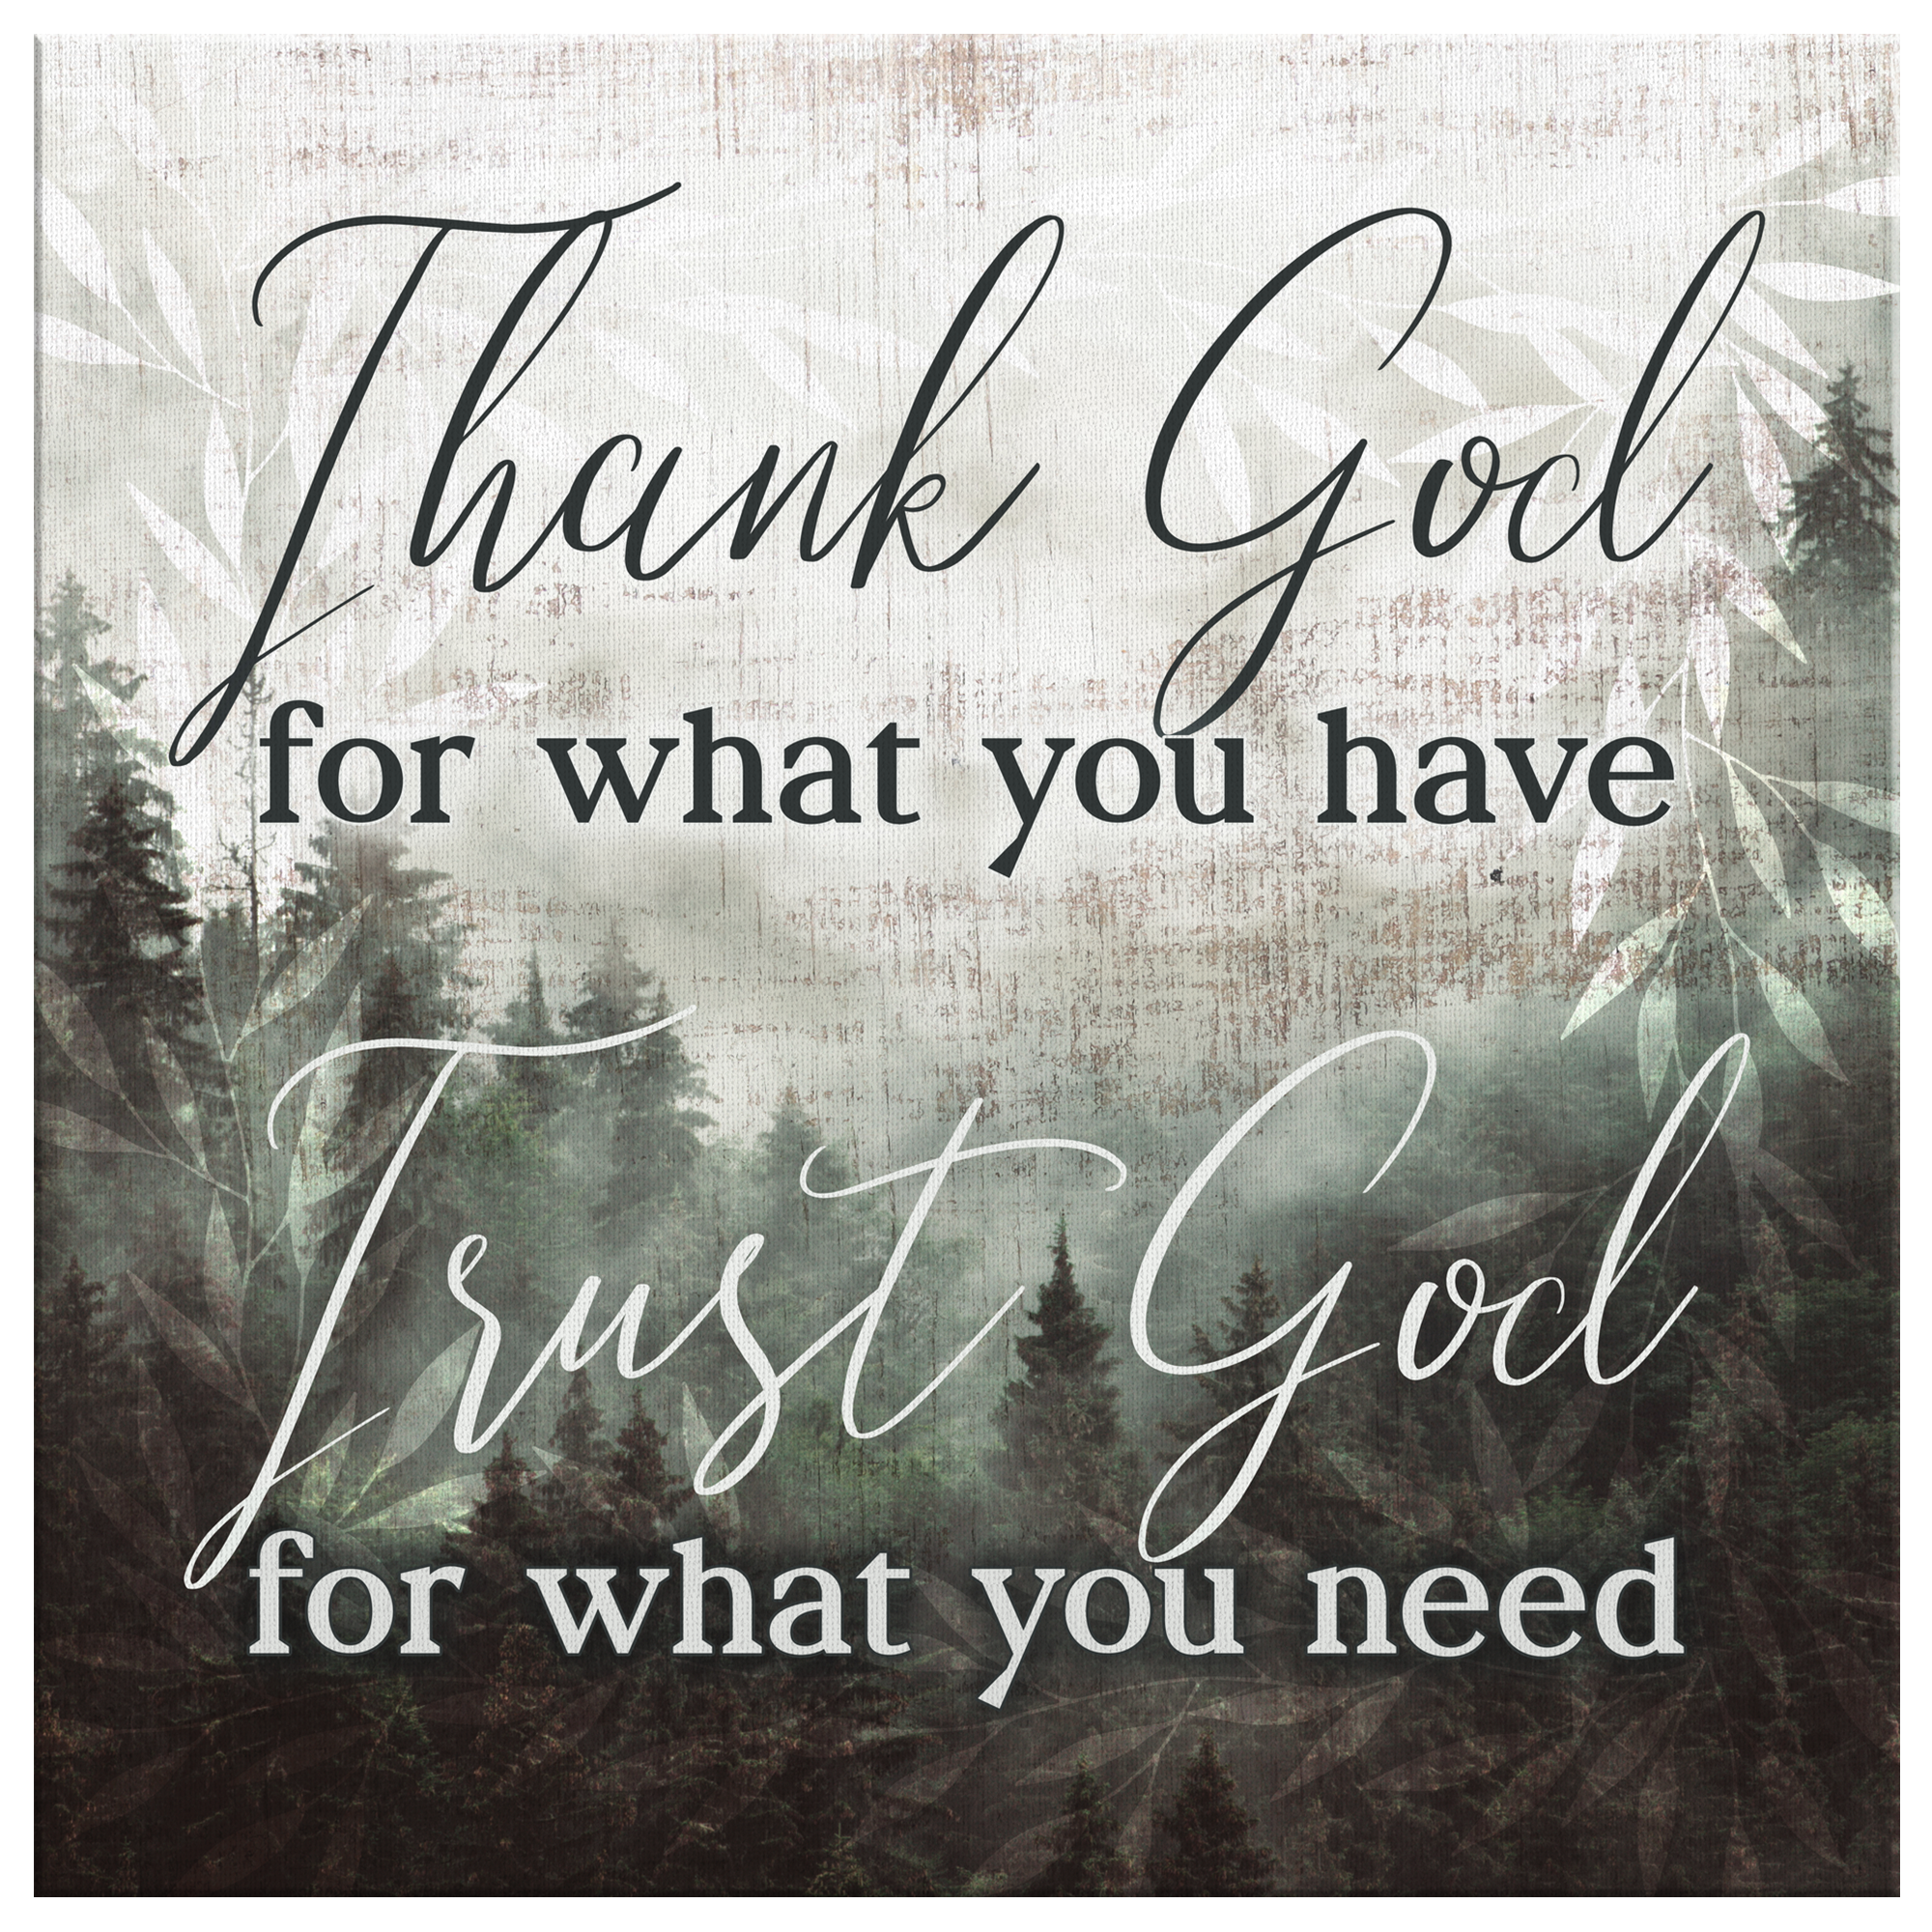 "Thank God For What You Have" Premium Canvas Wall Art